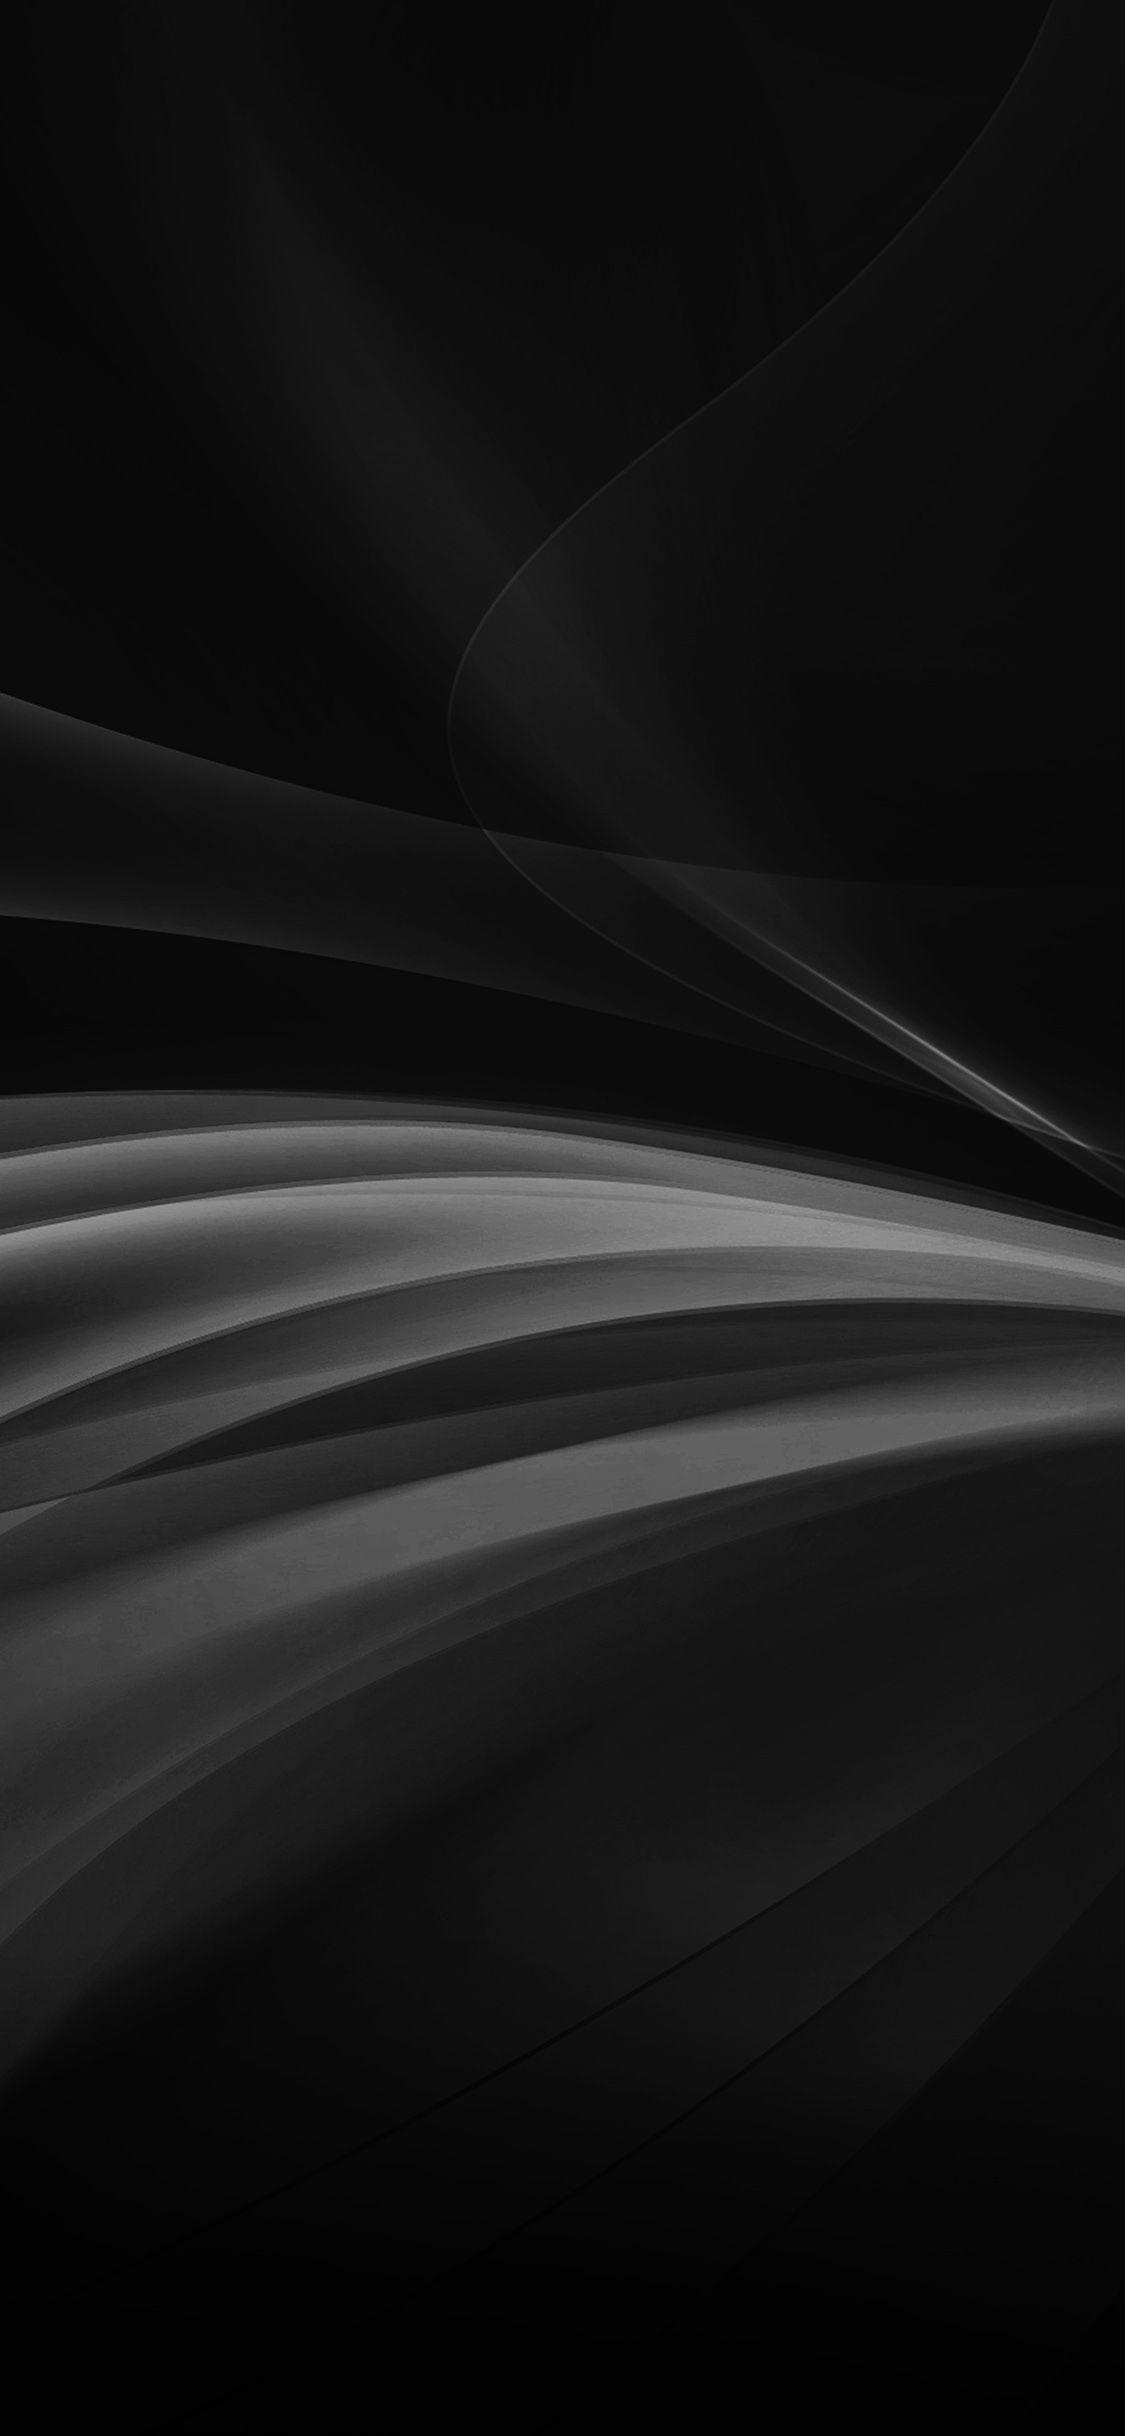 Black and White Abstract iPhone Wallpapers - Top Free Black and White ...